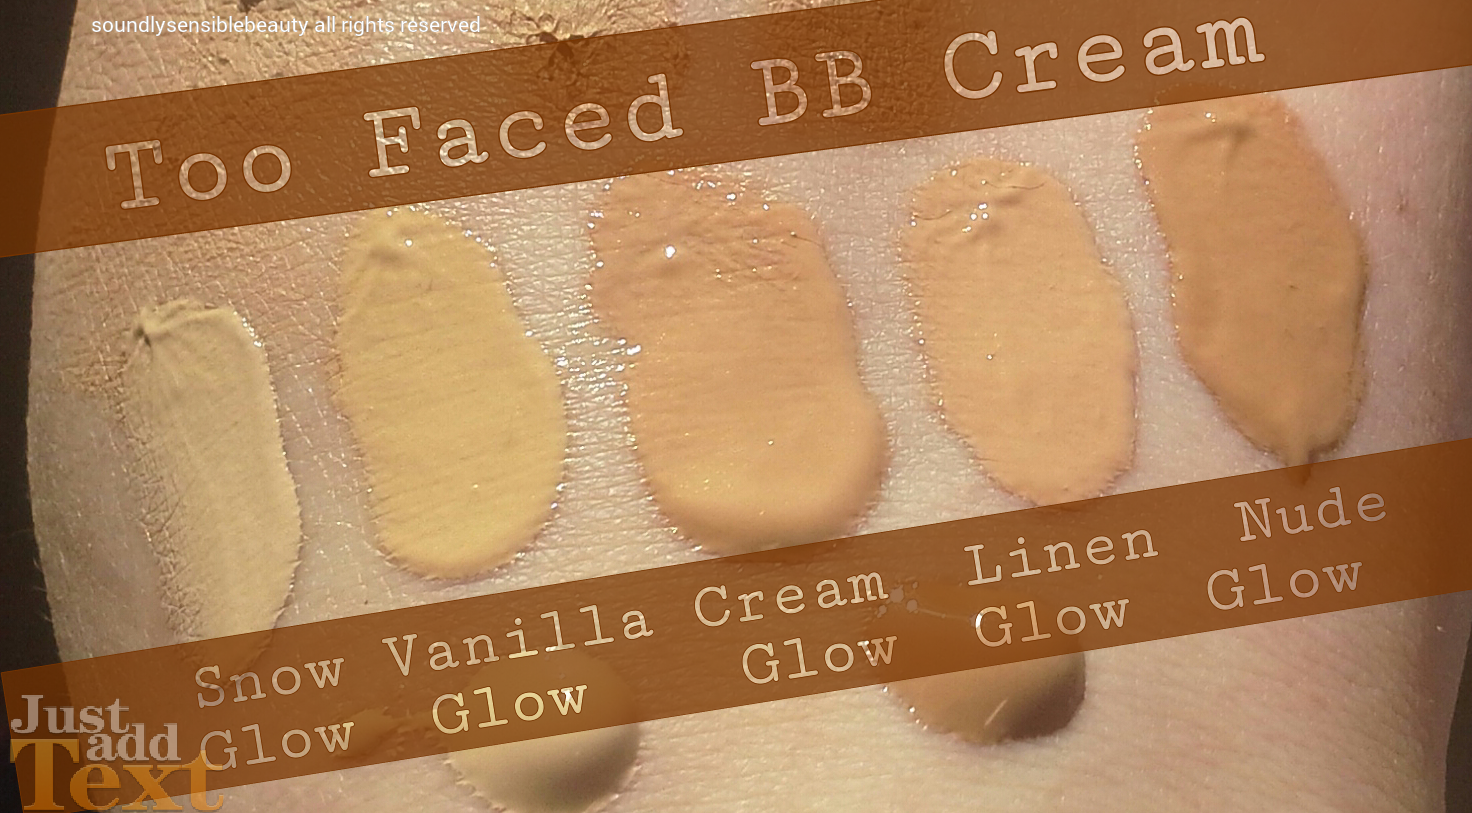 Too Faced BB Cream SPF 20; Review & Swatches of Shades